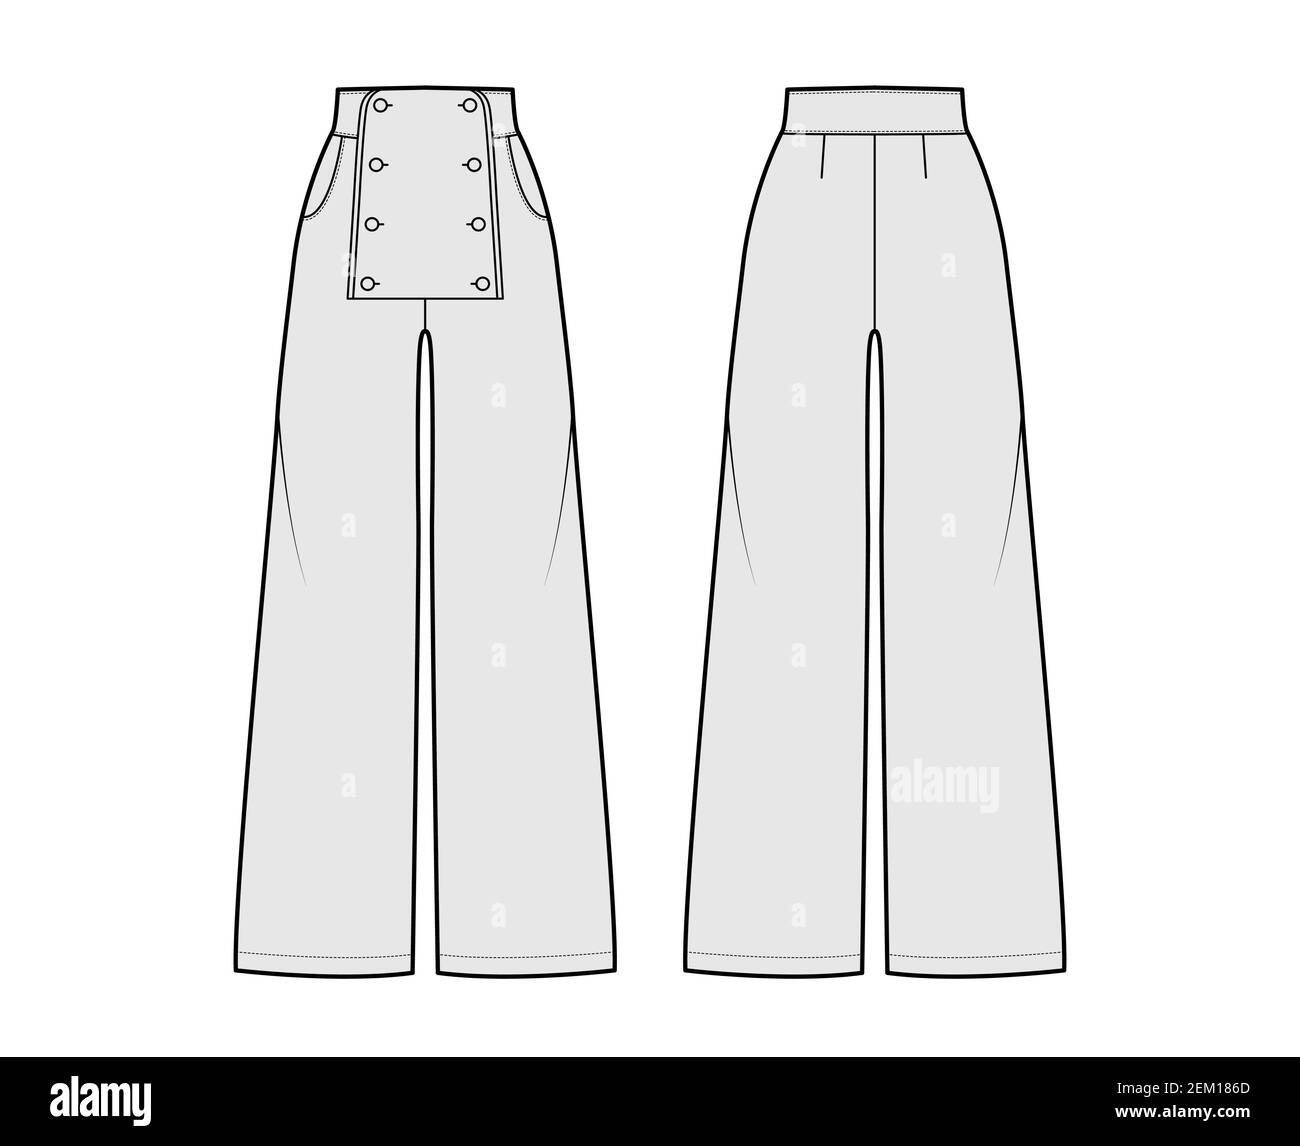 Set of Pants sailor technical fashion illustration with normal waist ...